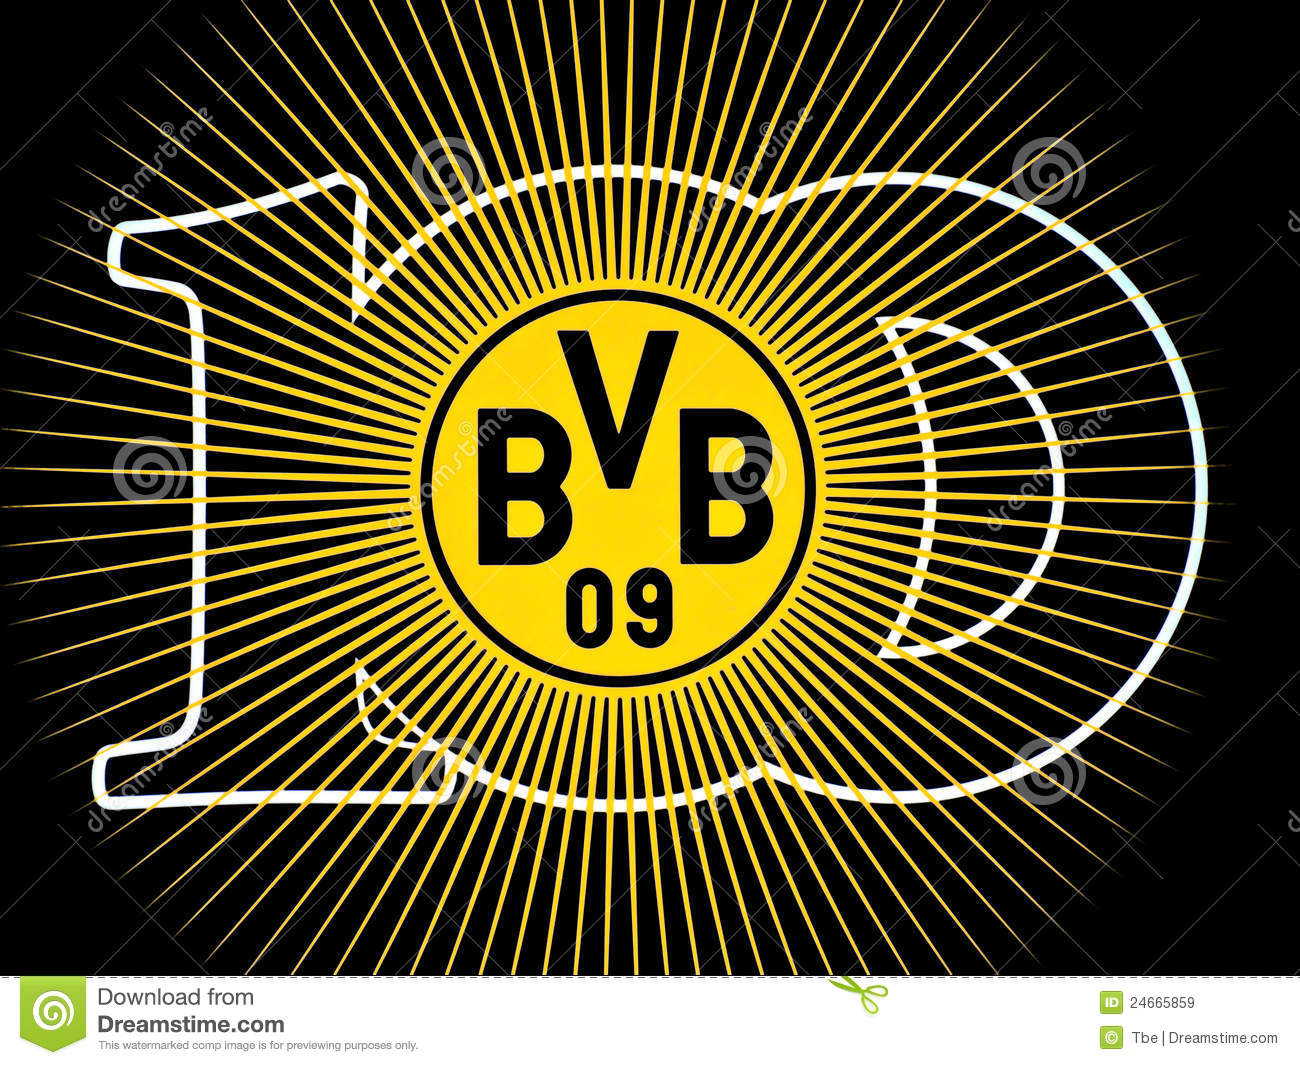 100 Years Clipart 100 Years Bvb 09 Editorial